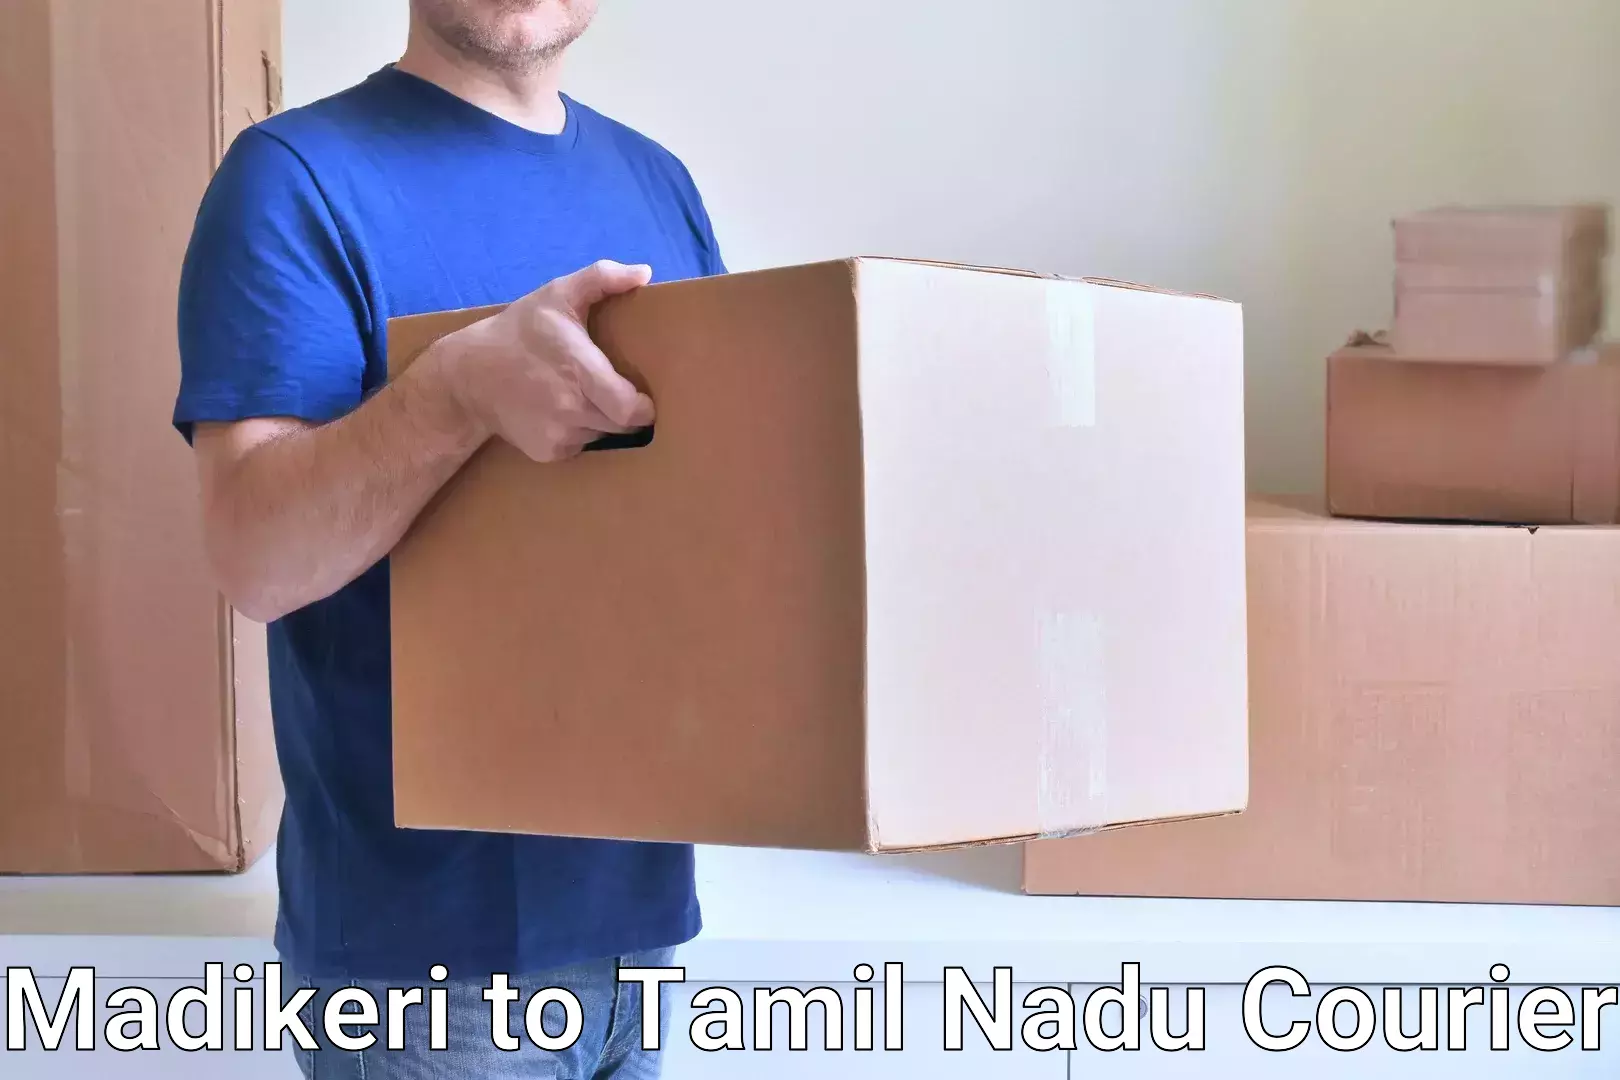 Large package courier Madikeri to Salem